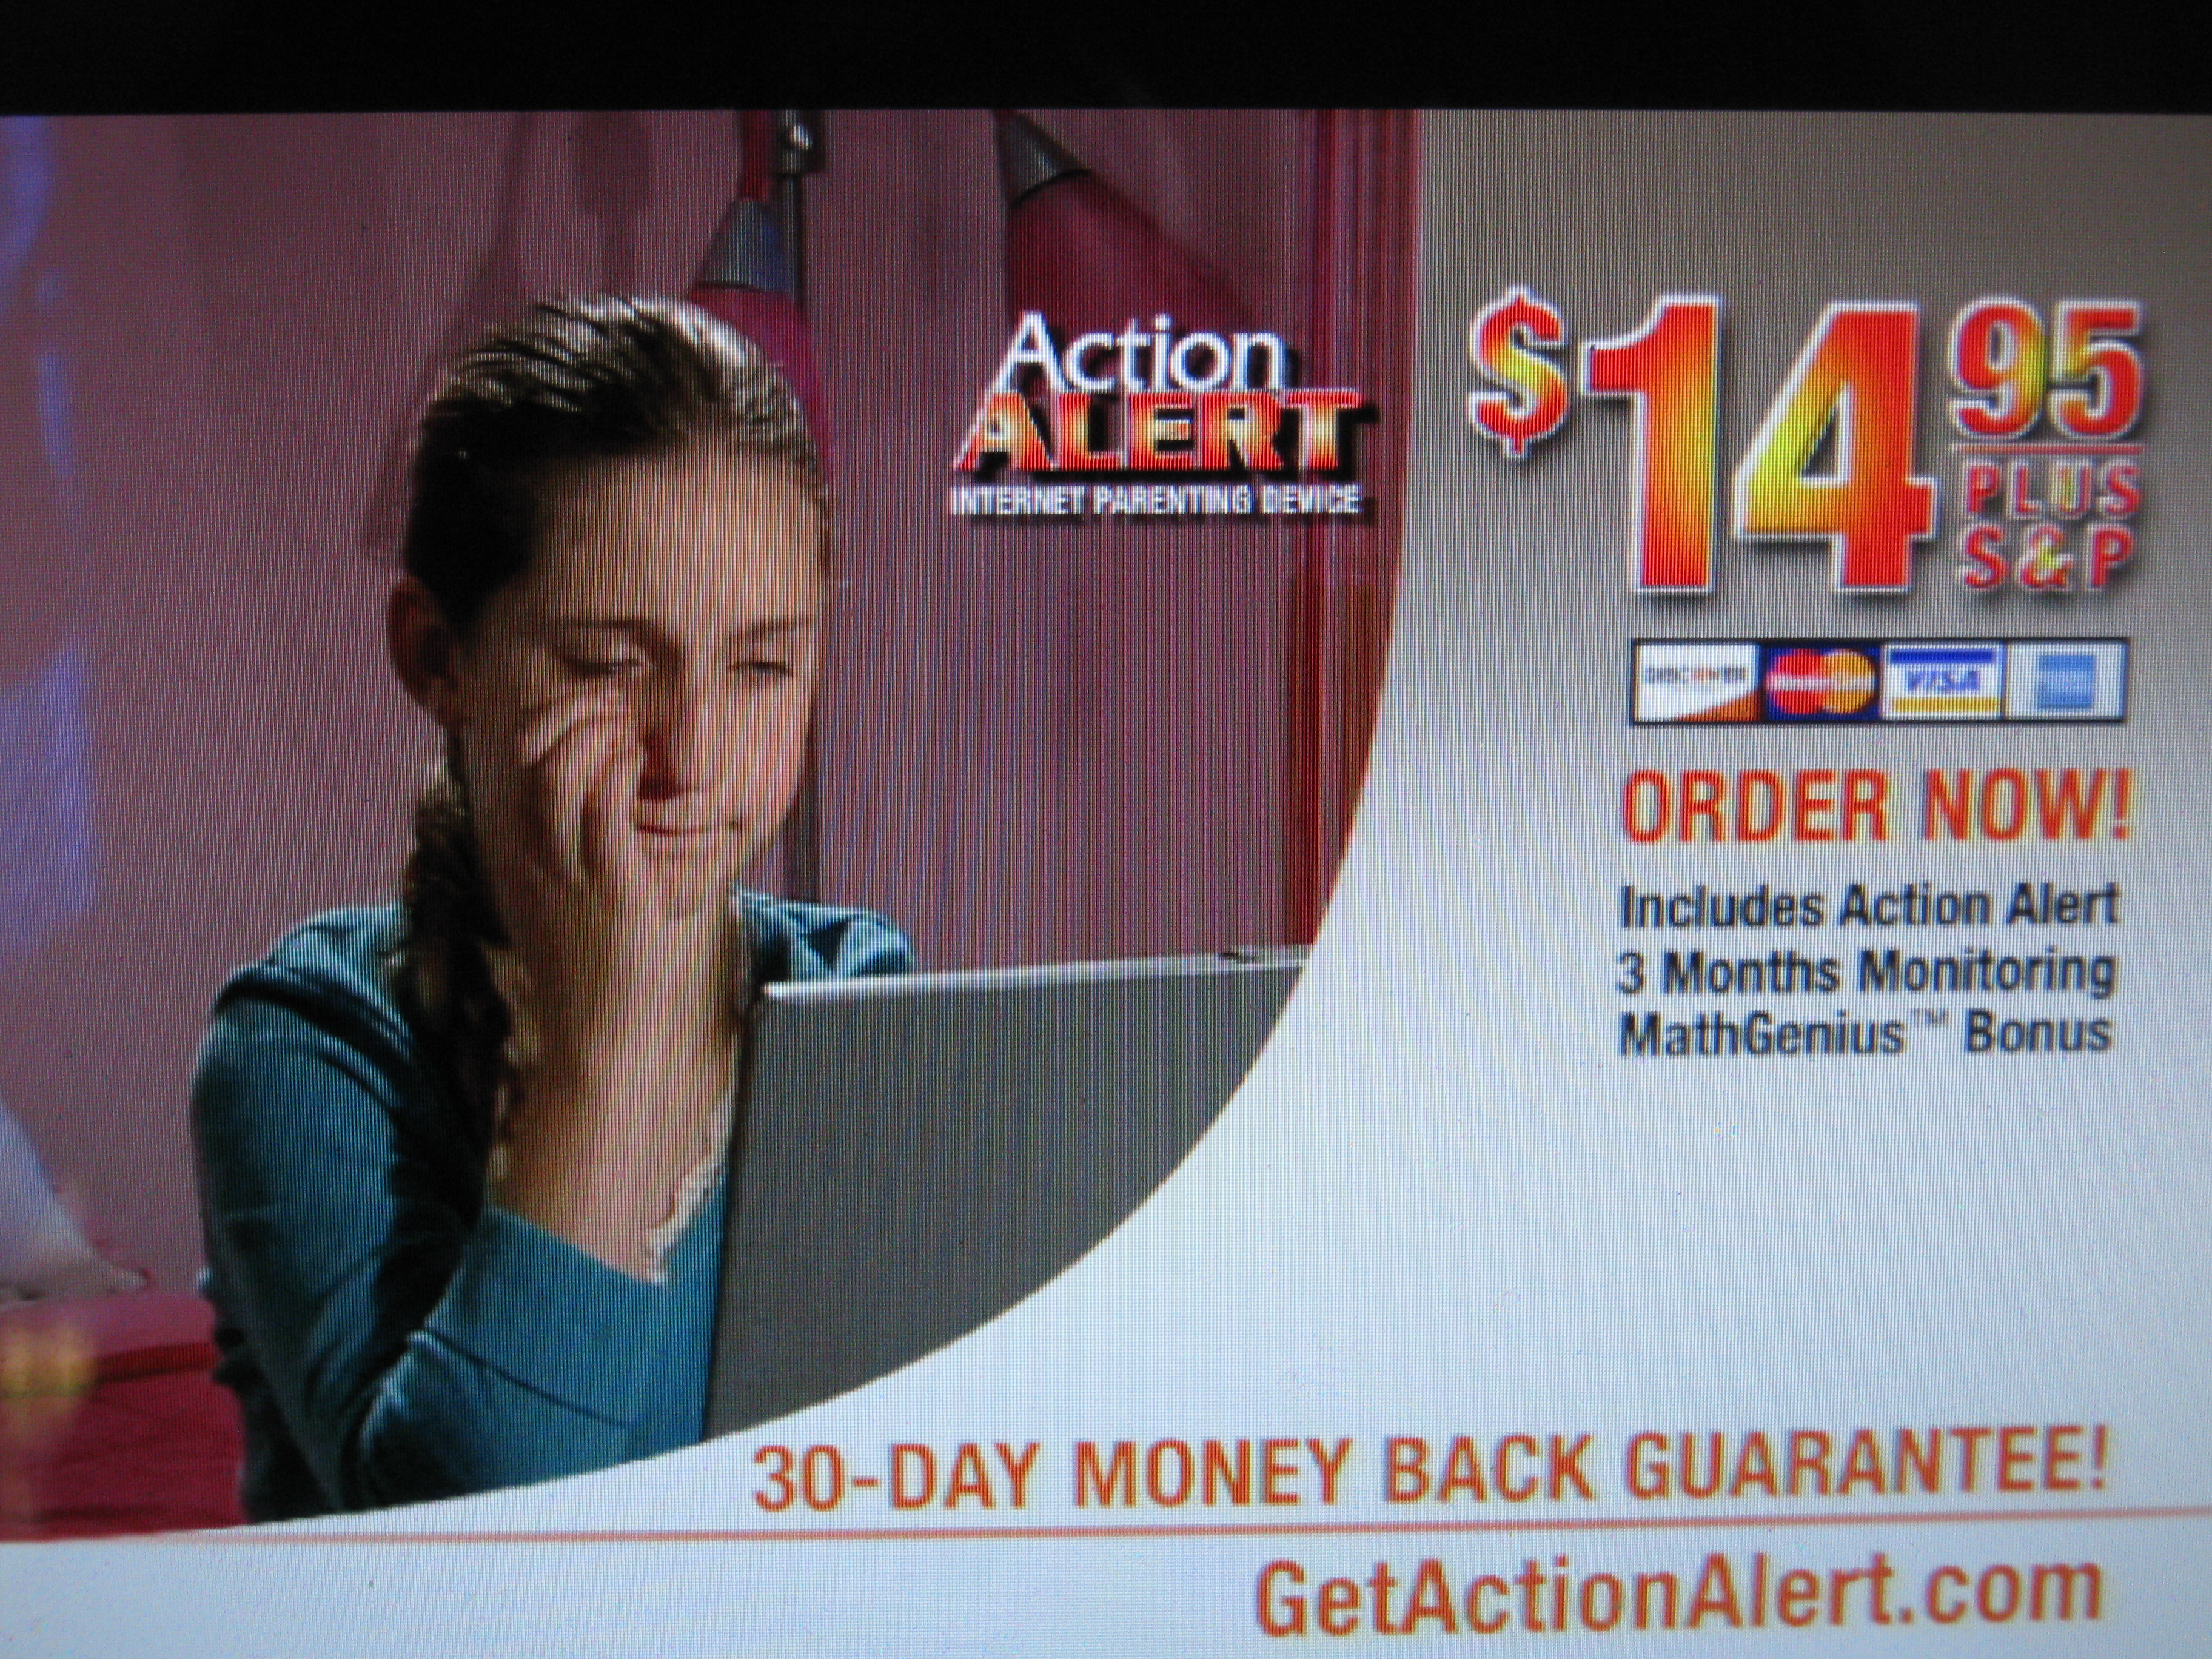 Carina in a Print Ad for Action Alert.